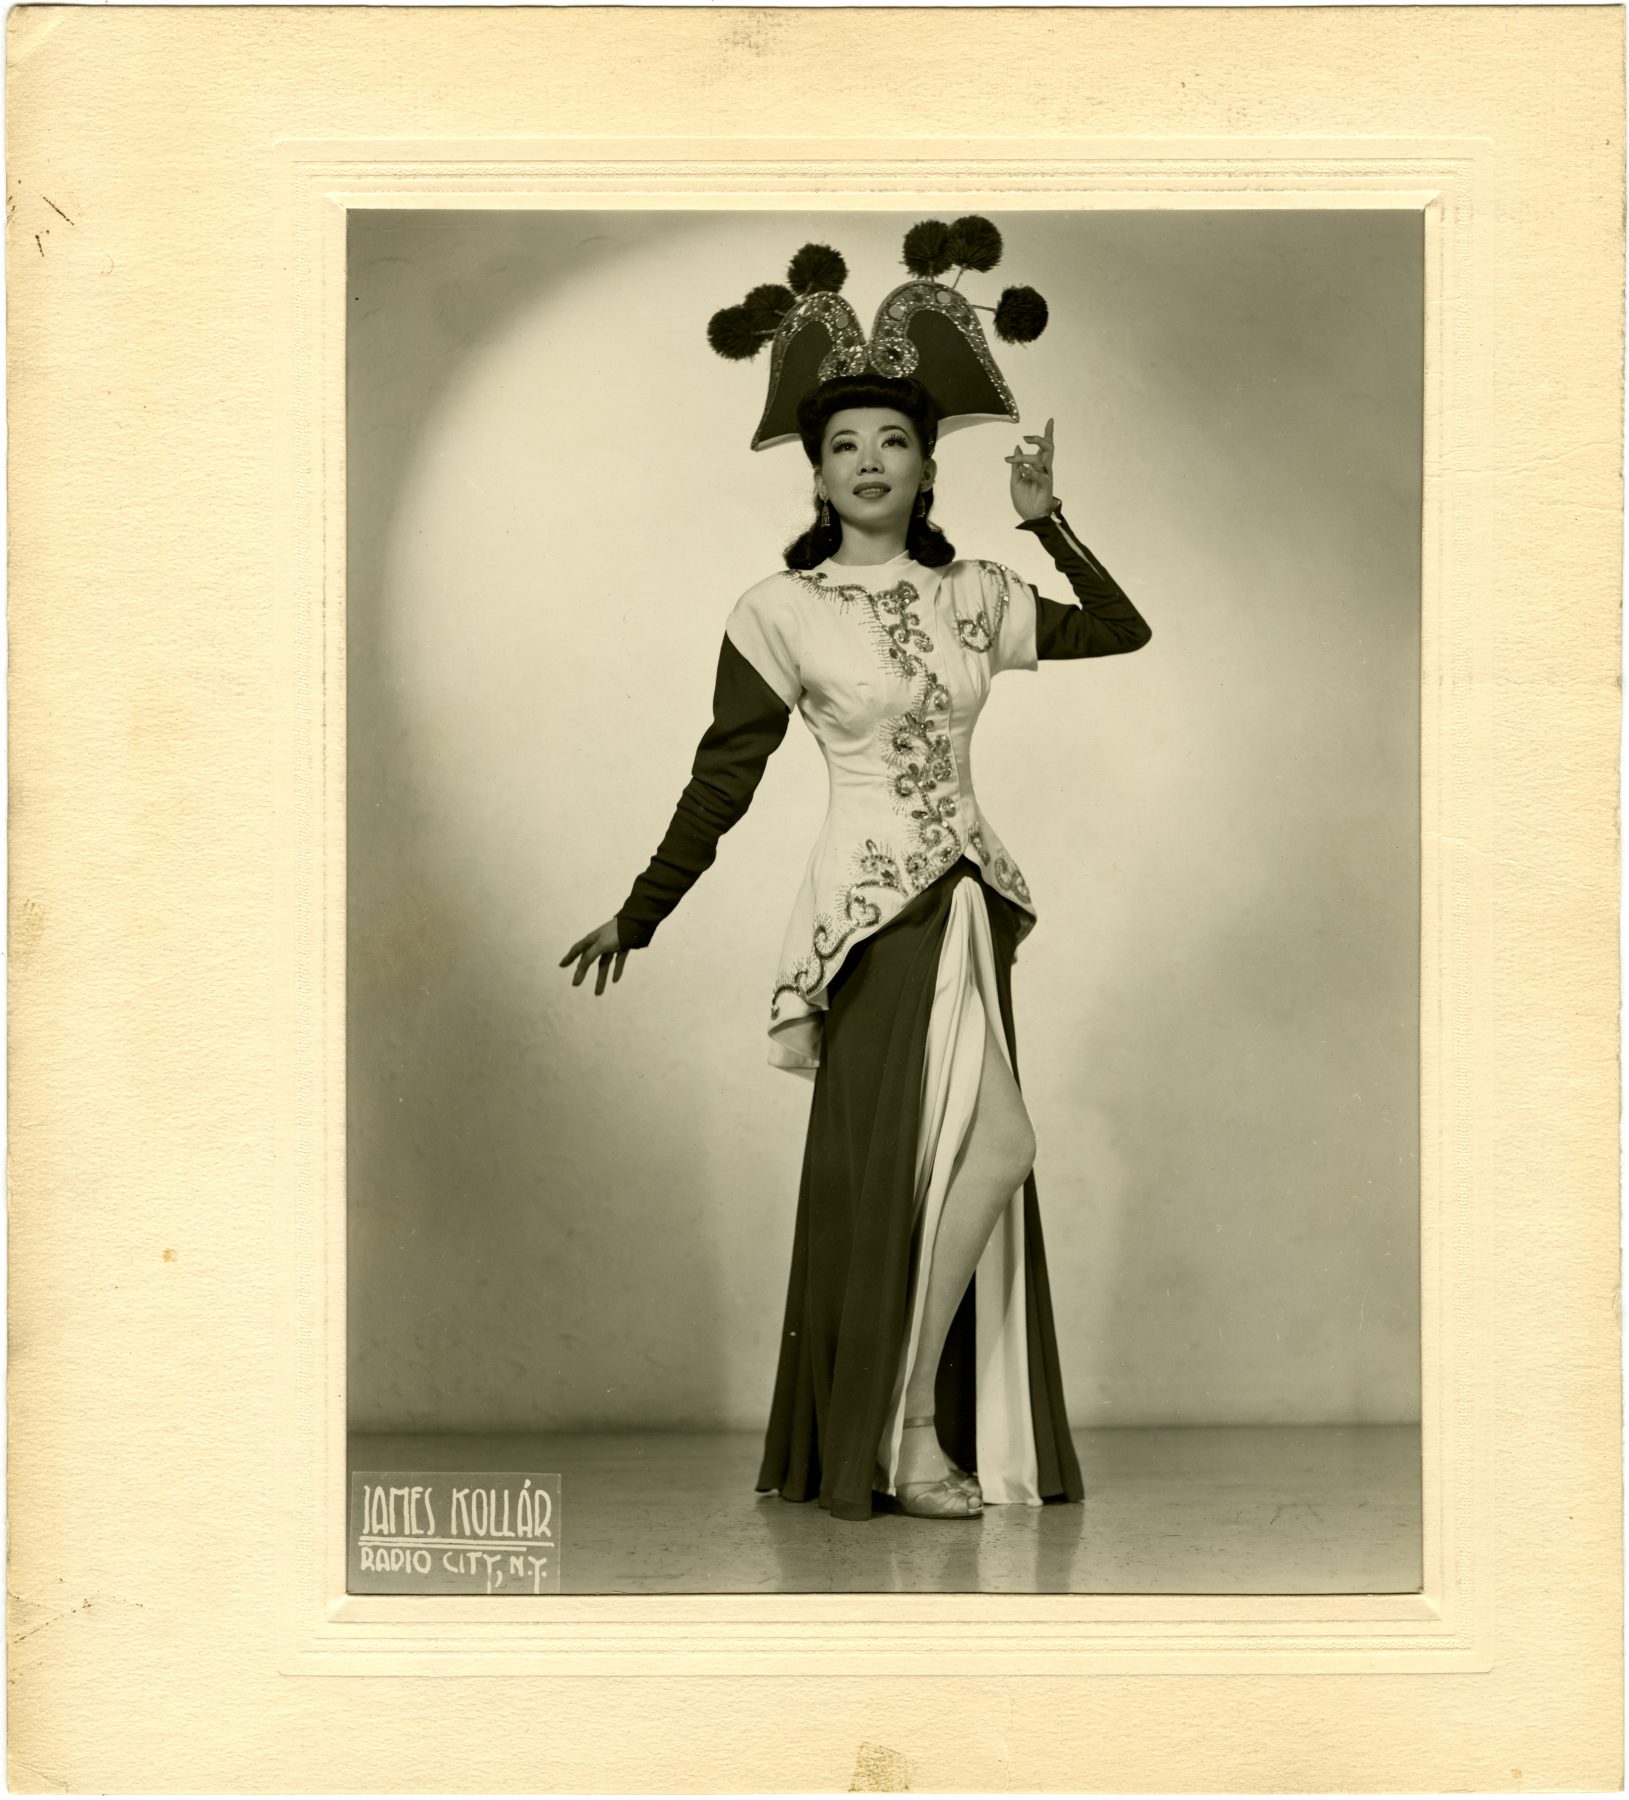 15 May 2019 Posted.
Mary Mon Toy in Costume, Courtesy of Marnie Mueller, Museum of Chinese in America (MOCA) Collection.
身着演出服装的Mary Mon Toy，Marnie Mueller捐赠，美国华人博物馆（MOCA）馆藏